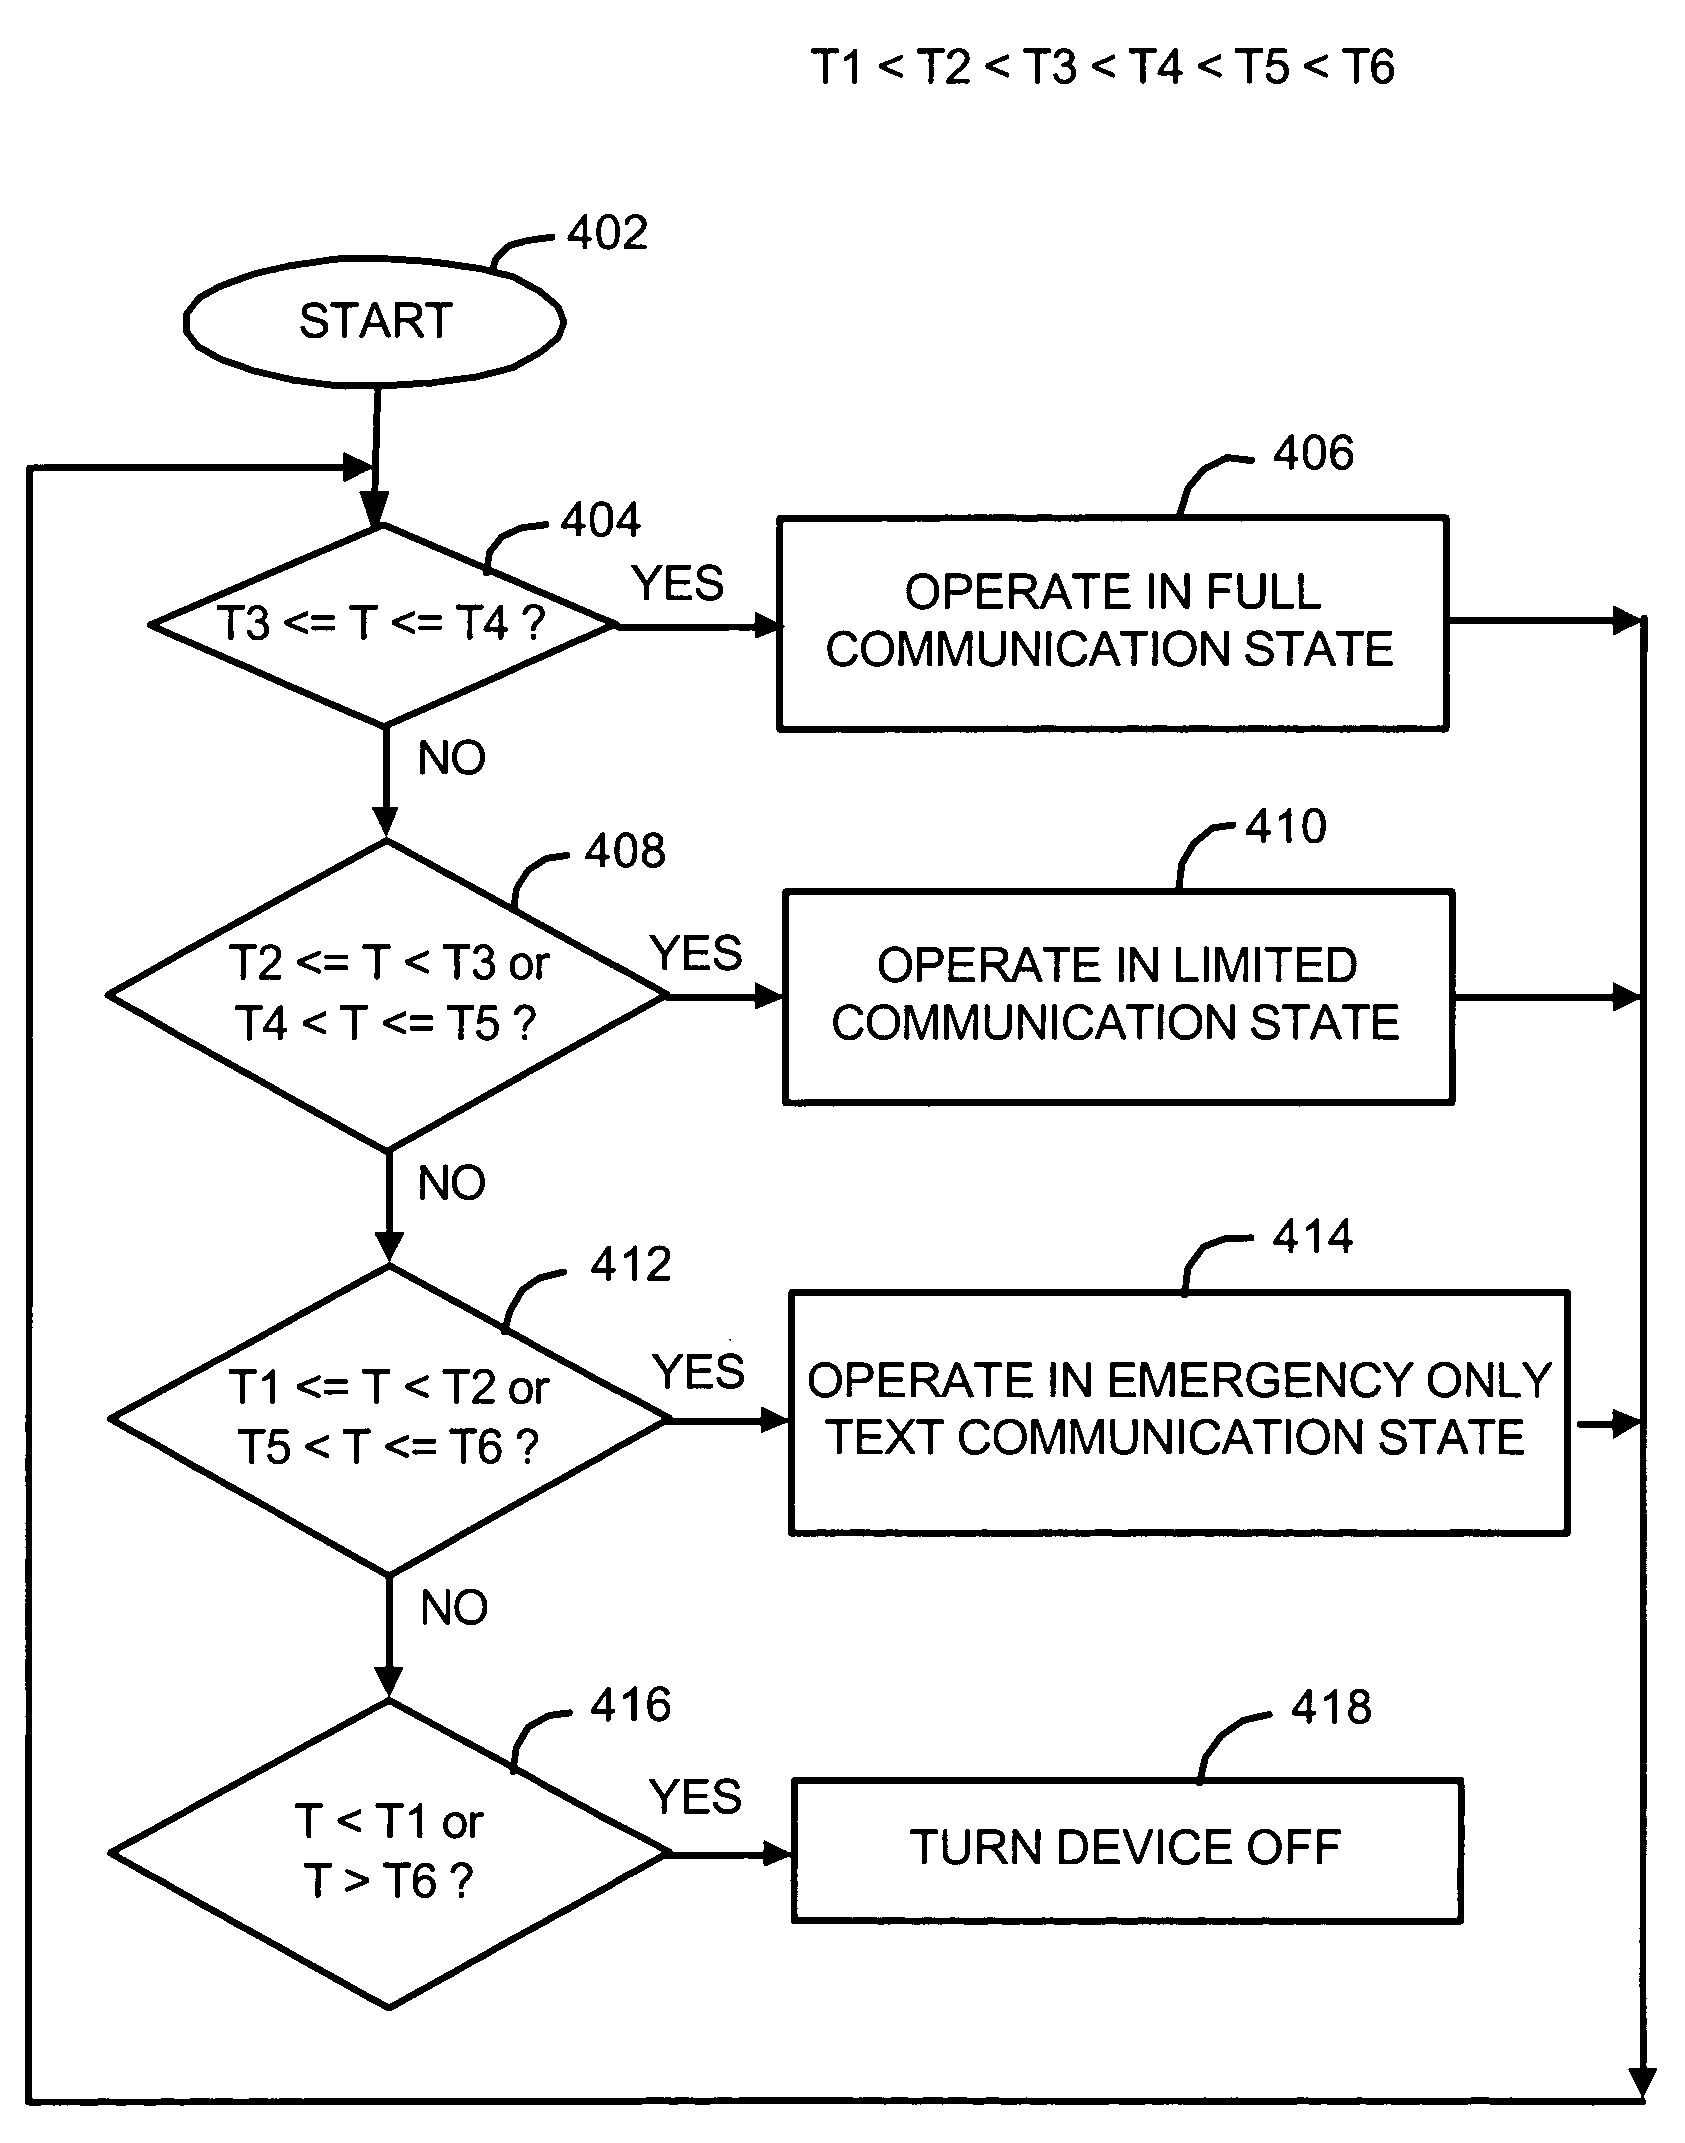 Methods and apparatus for limiting communication capabilities in mobile communication devices